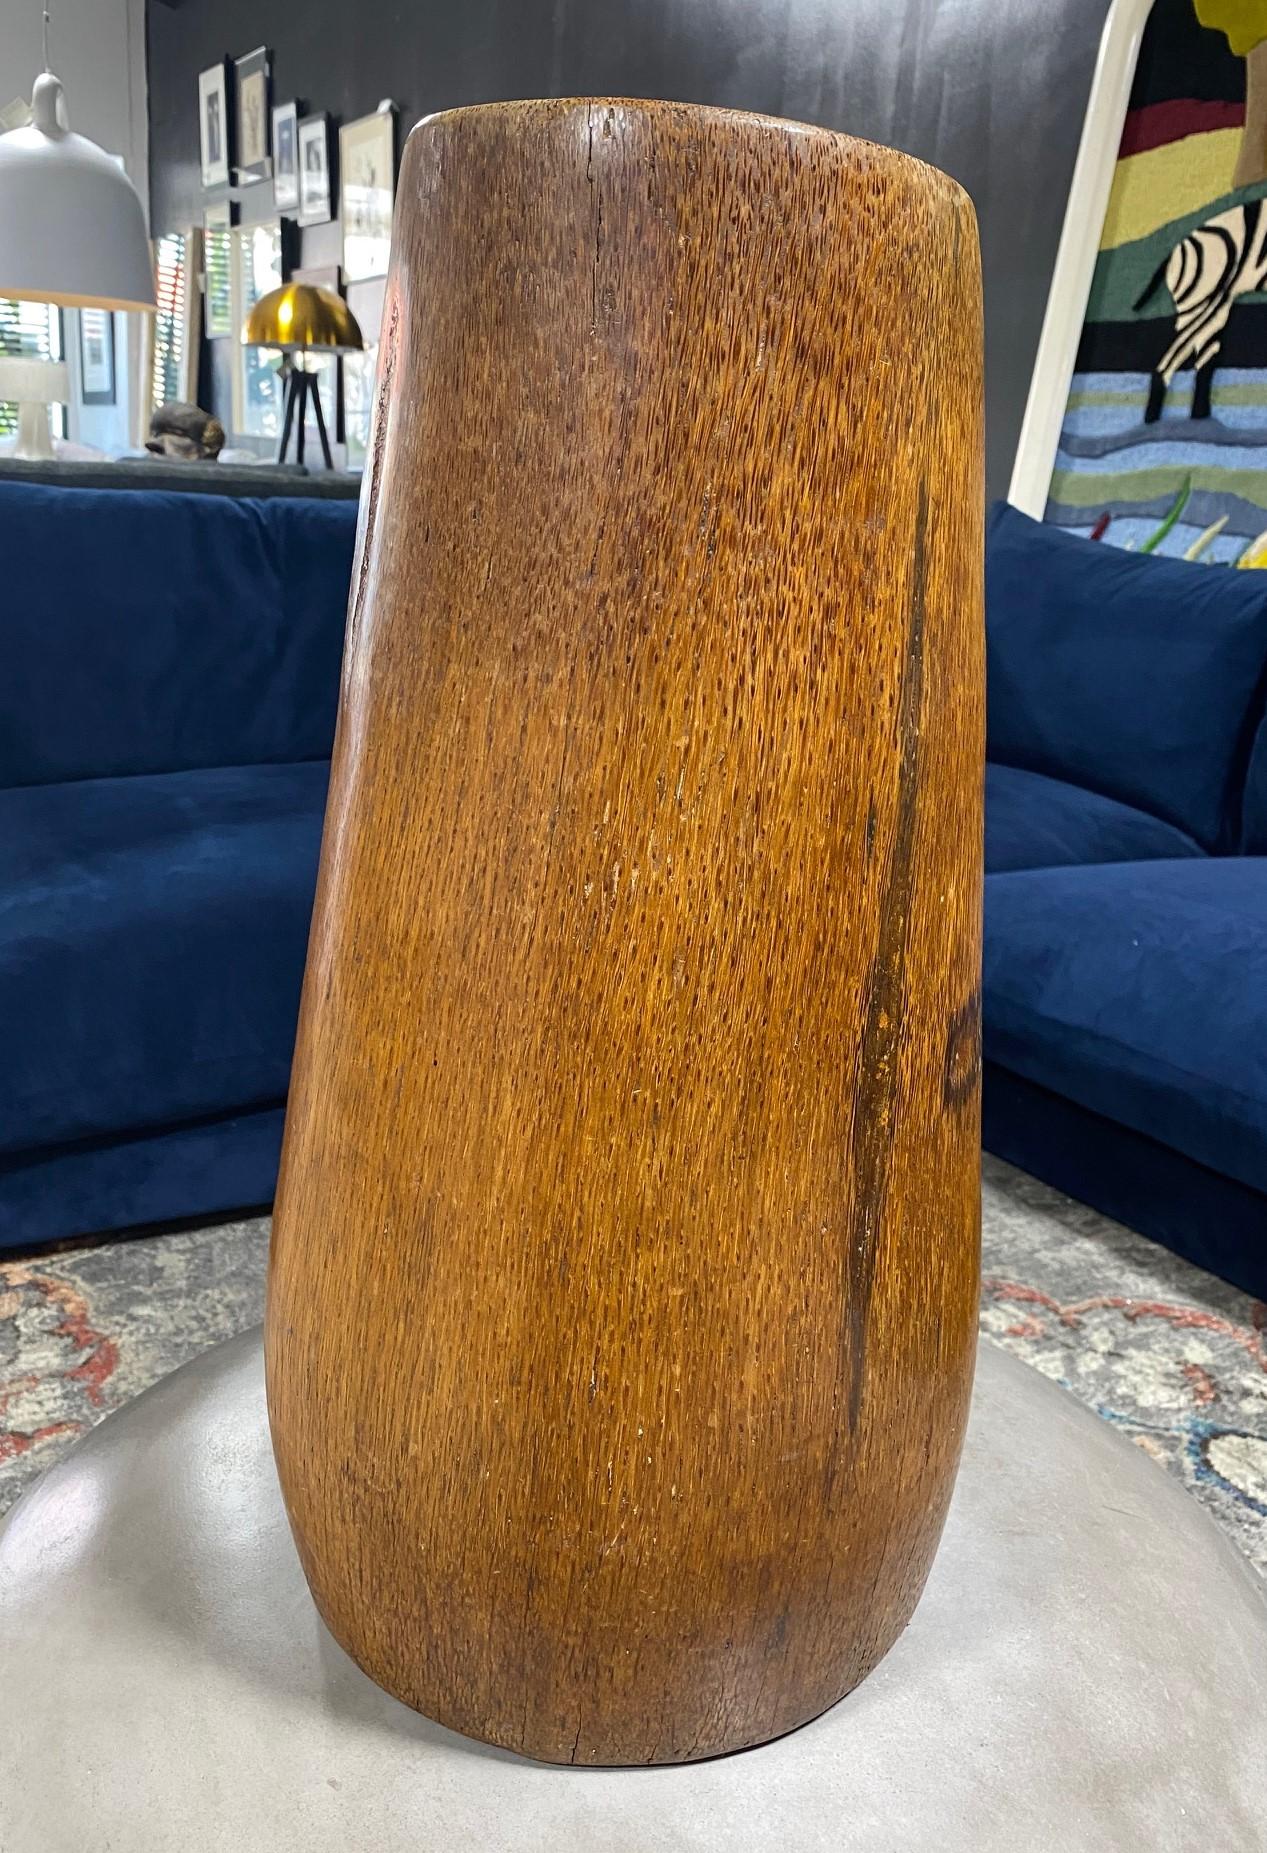 A truly spectacular one of a kind work - a large, quite heavy hand carved natural wood (perhaps a massive root) or bamboo standing vase. The piece has a very organic and sculptural look to it - Wabi-Sabi (the Japanese aesthetic of beauty that